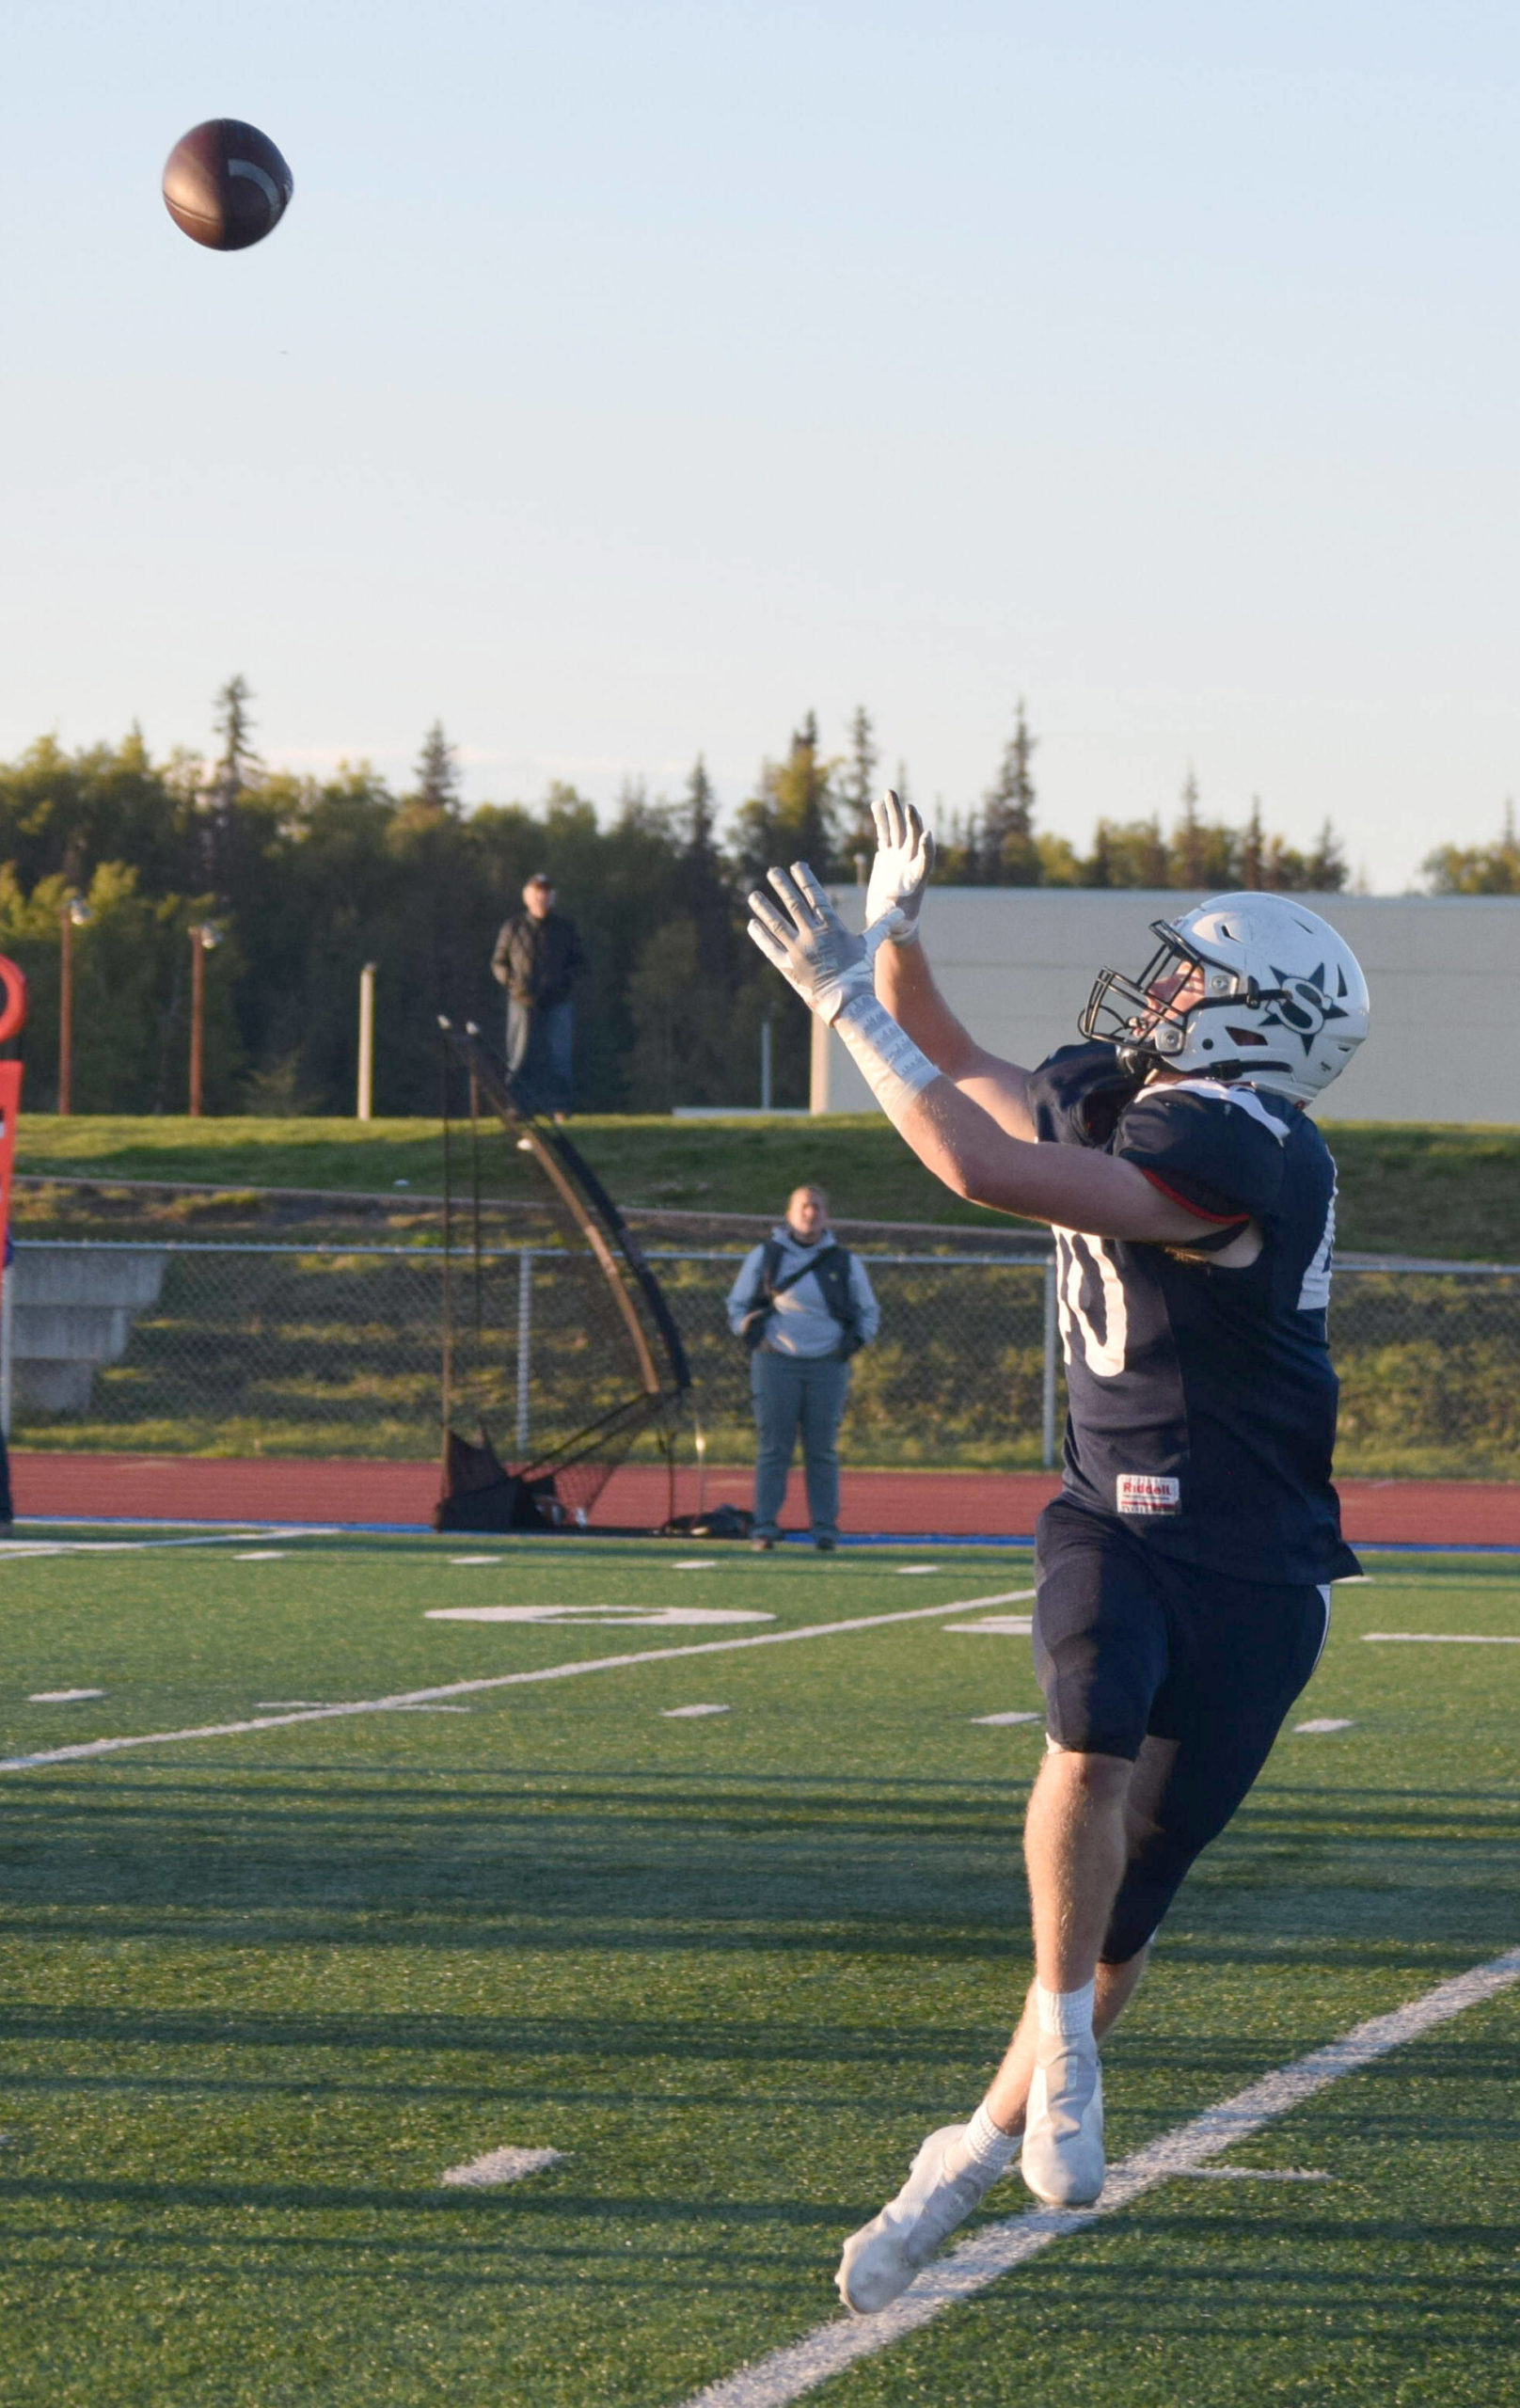 Dylan Dahlgren receives a long pass to score a touchdown during Soldotna High’s homecoming footall game at Justin Maile Field in Soldotna, Alaska, on Friday, Sept. 10, 2021. (Camille Botello/Peninsula Clarion)